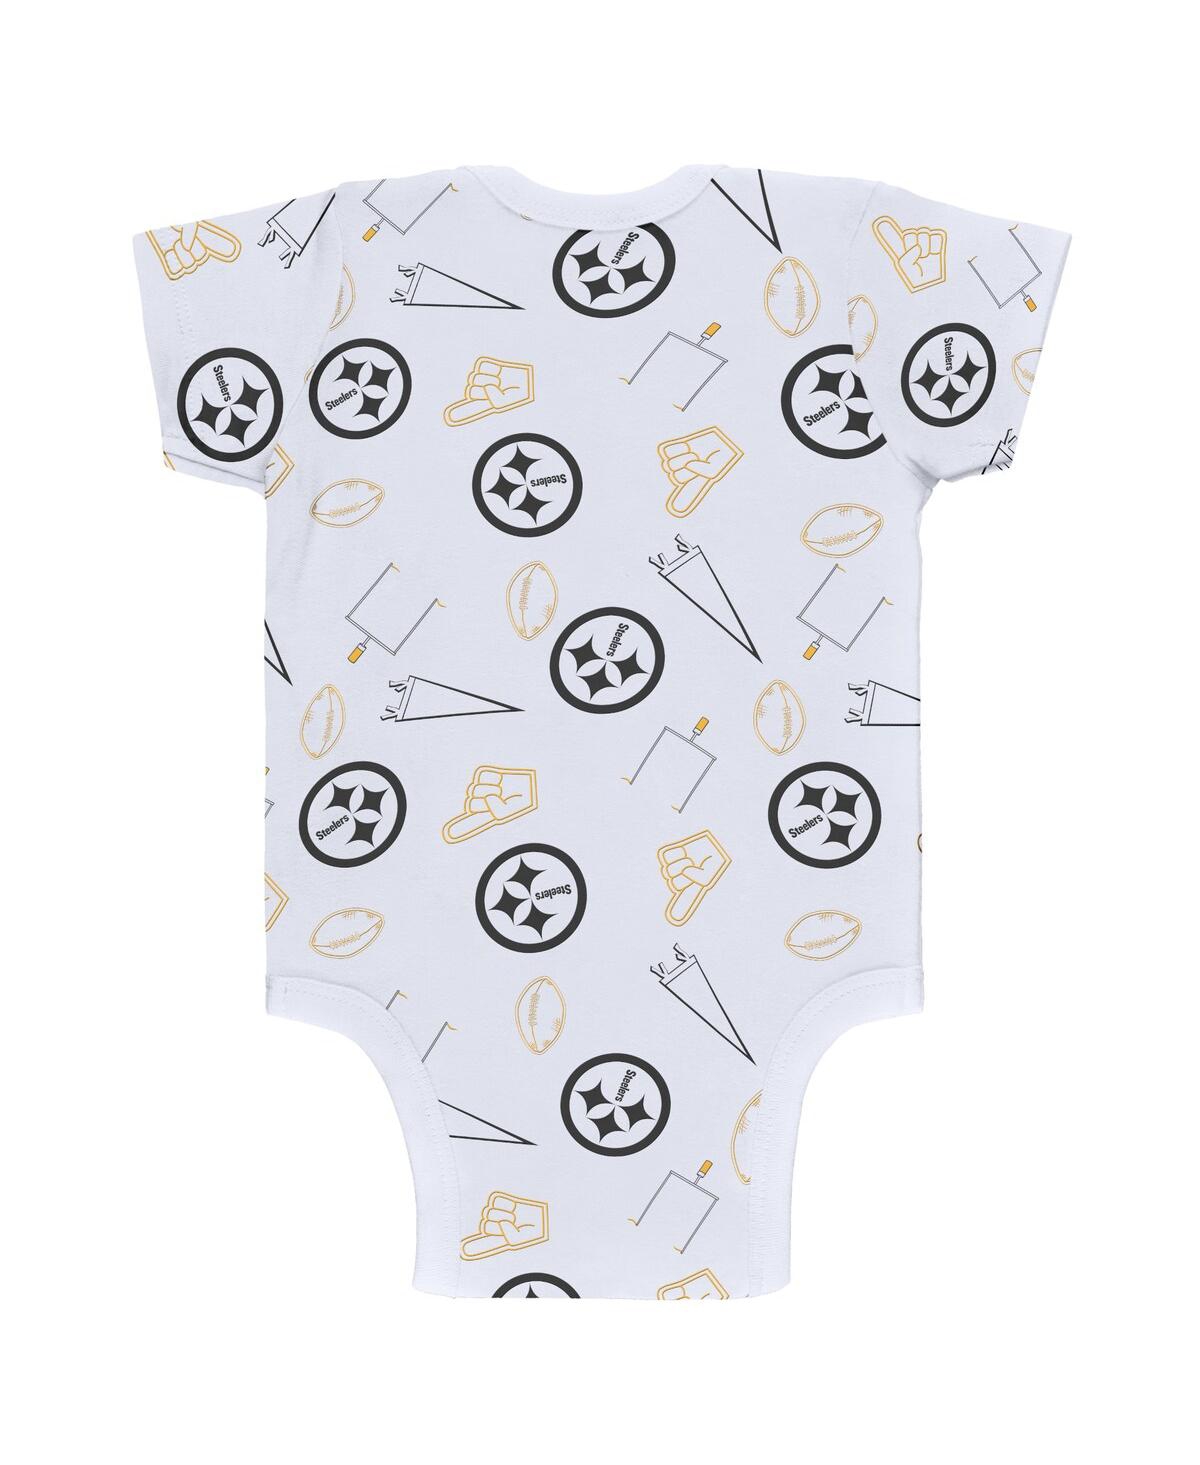 Shop Wear By Erin Andrews Baby Boys And Girls  Gray, Black, White Pittsburgh Steelers Three-piece Turn Me  In Gray,black